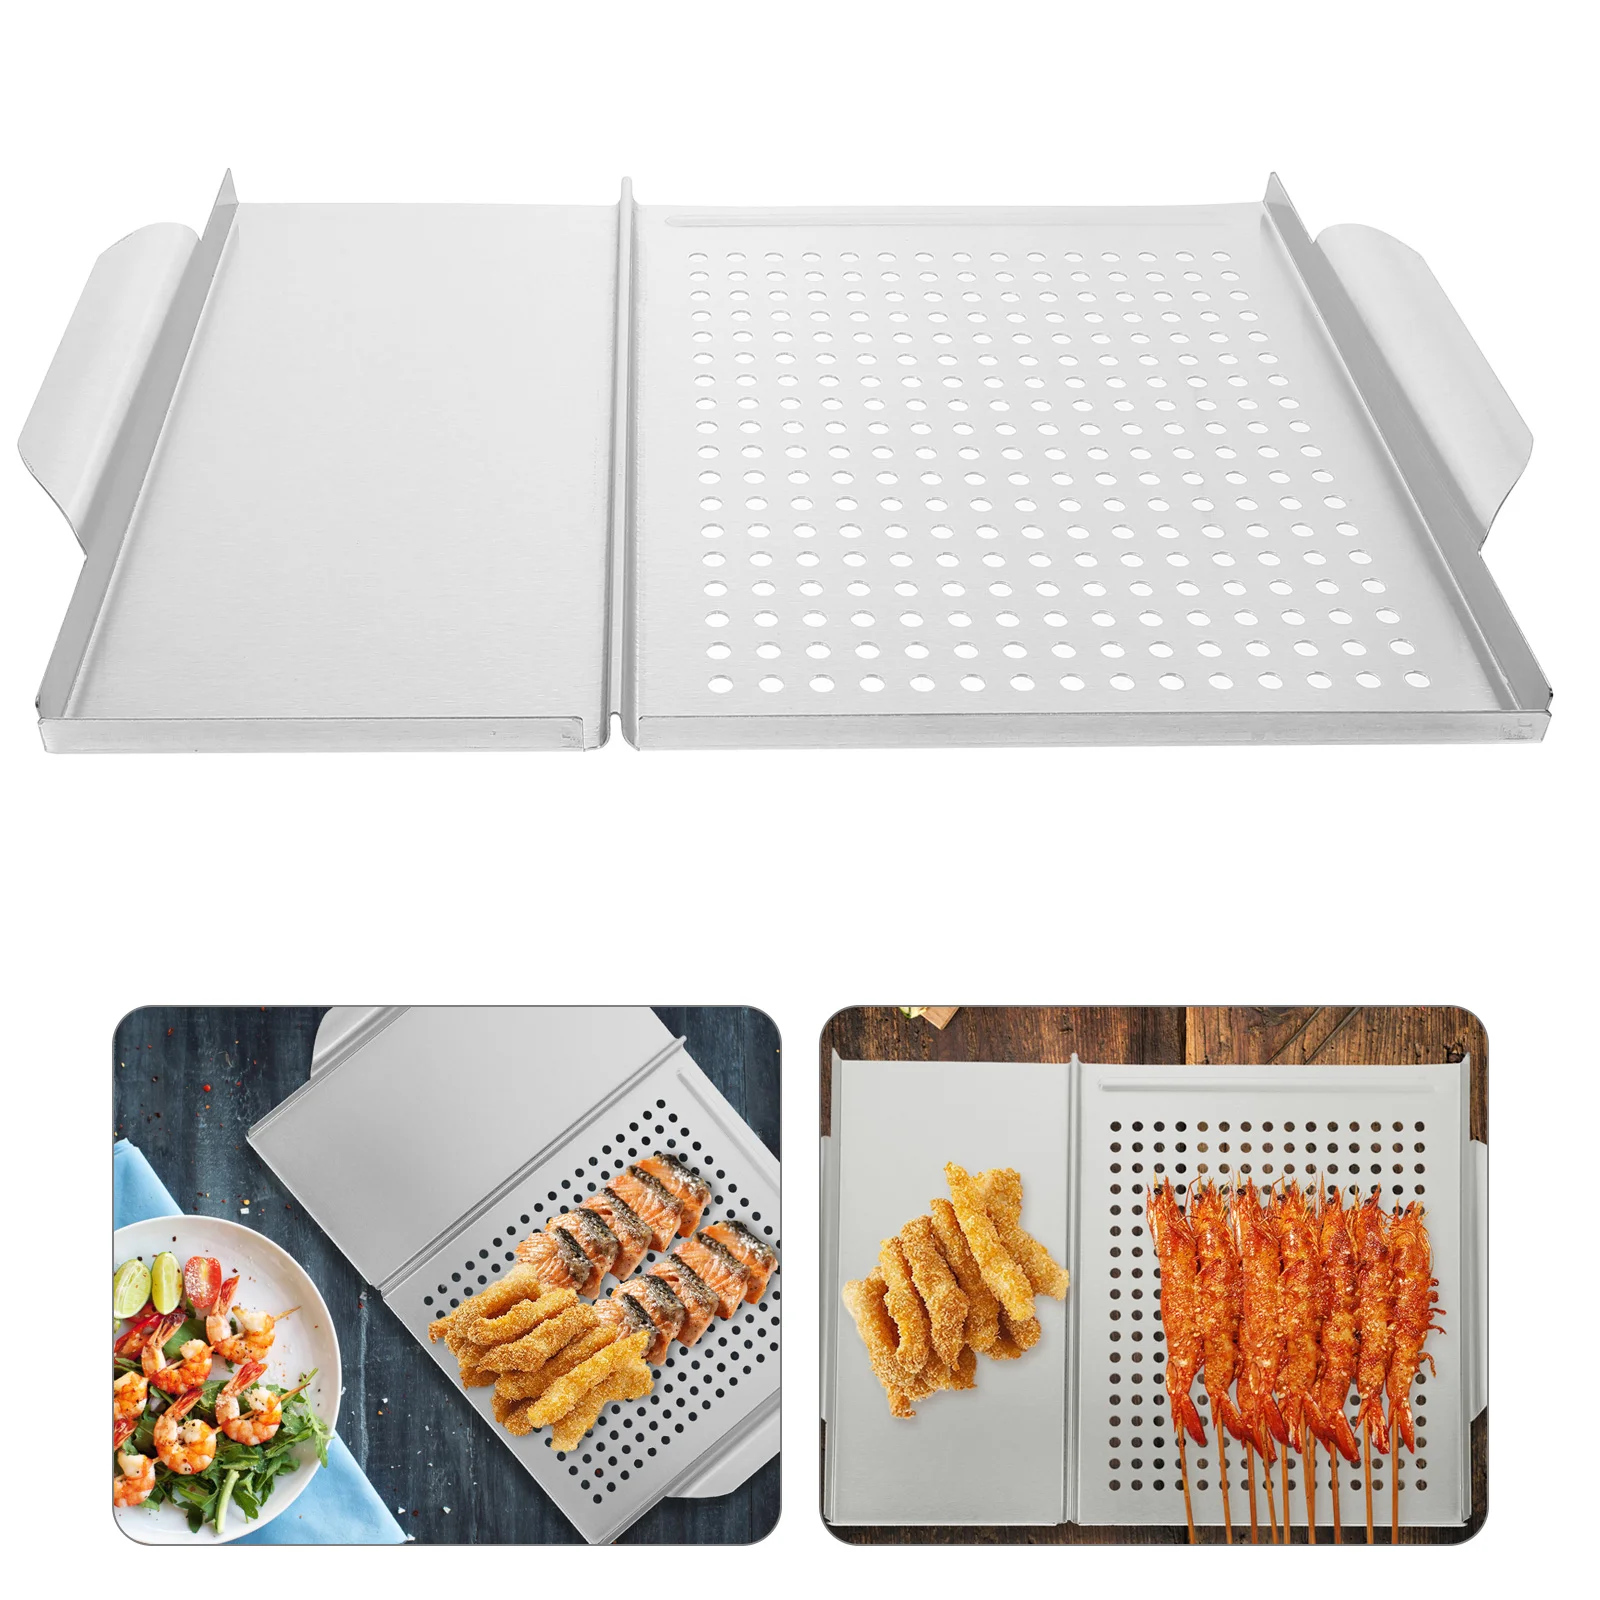 

Grill Plate Plates Pan Barbecue Bbq Draining Steel Stainless Supplies Home Vegetable 12 Convenient Professional Rack Grid